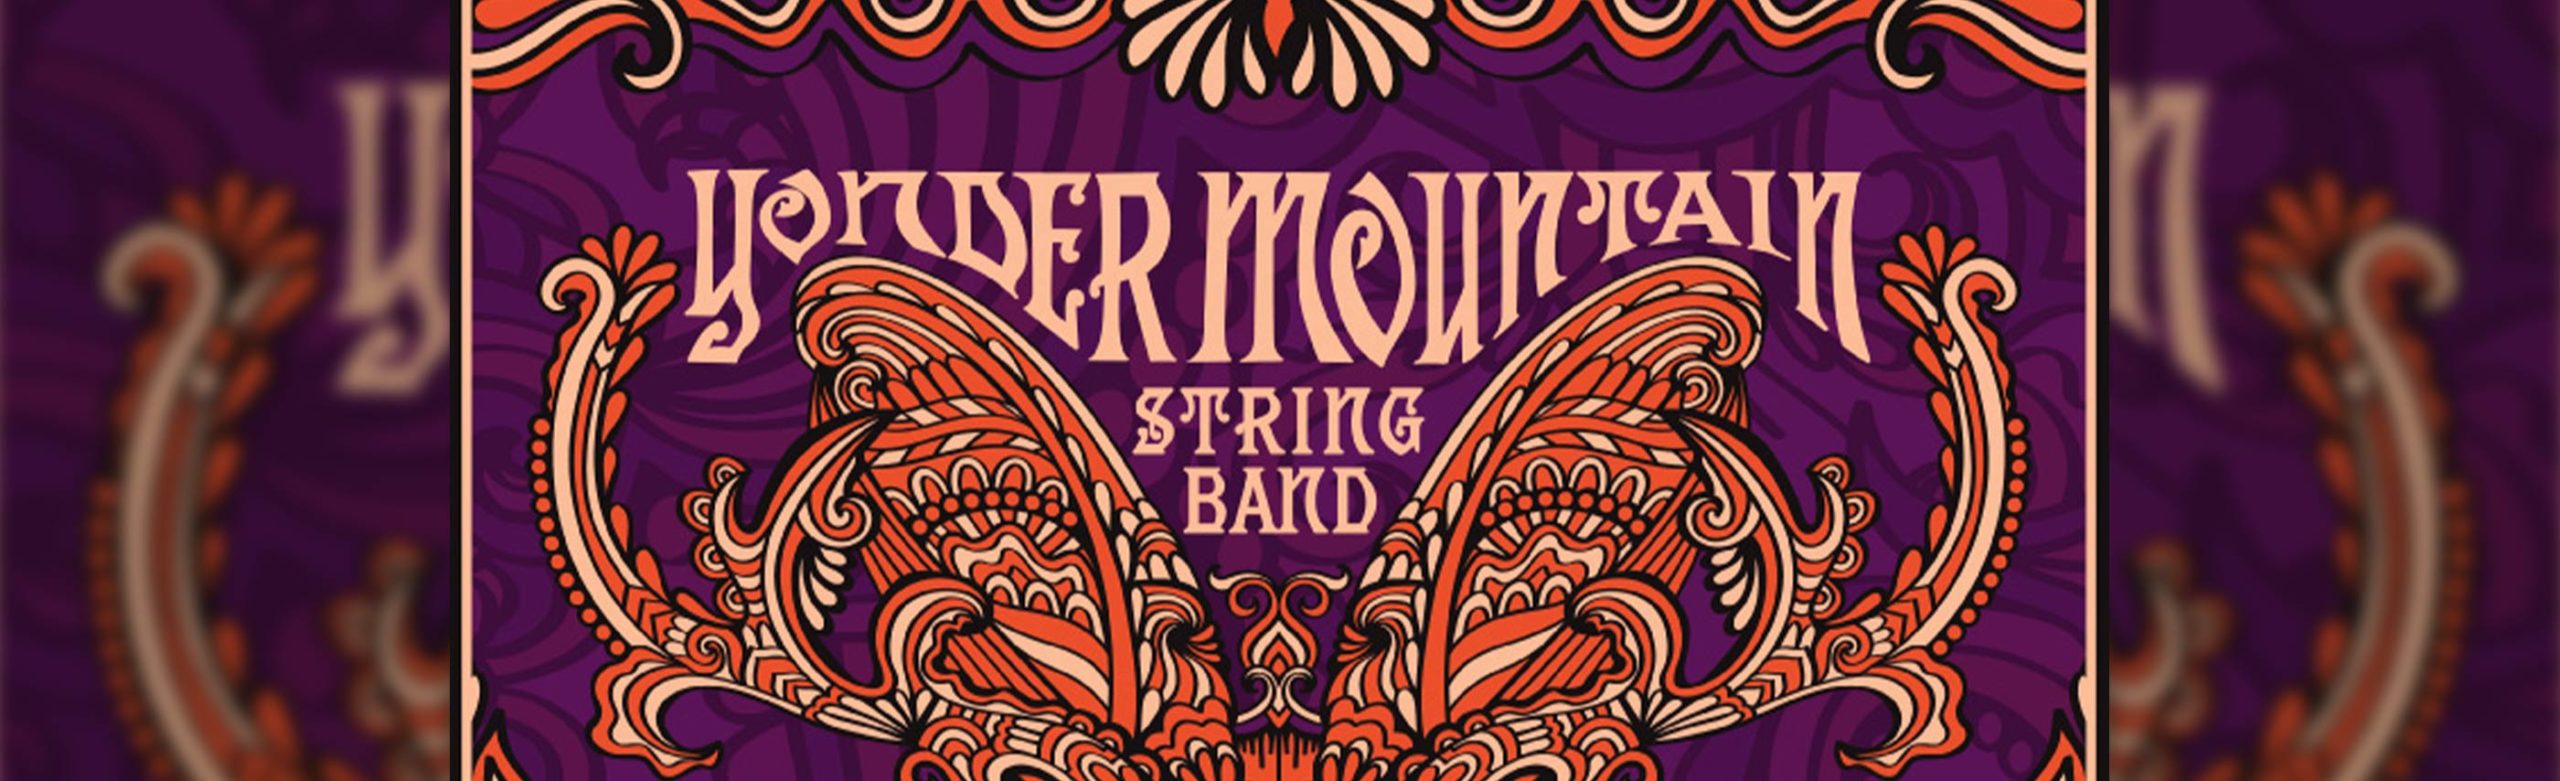 Event Info: Yonder Mountain String Band at The ELM 2022 Image